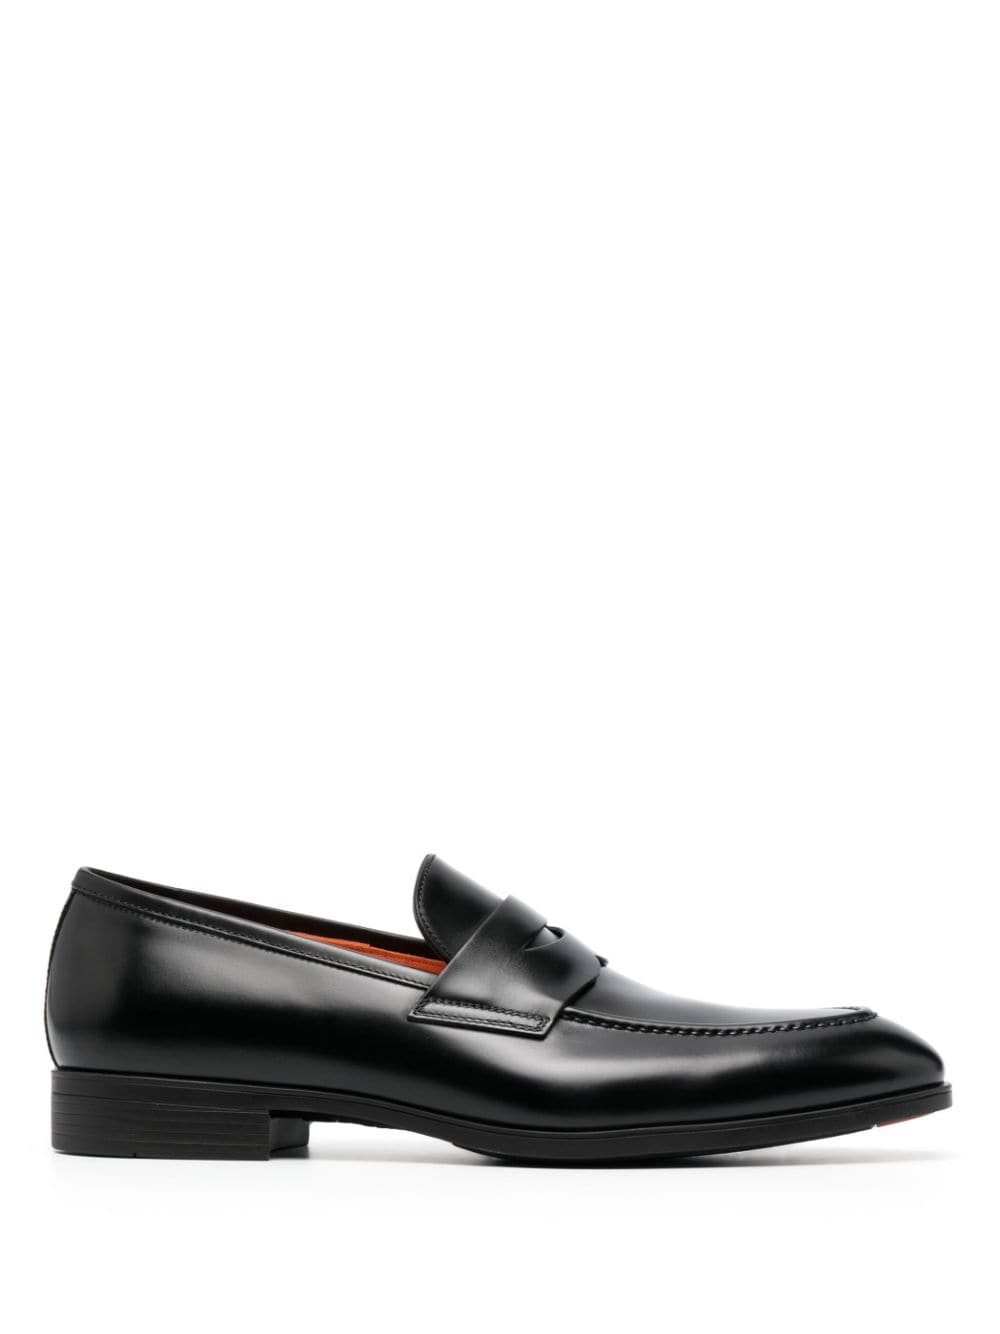 SANTONI POINTED-TOE LEATHER LOAFERS